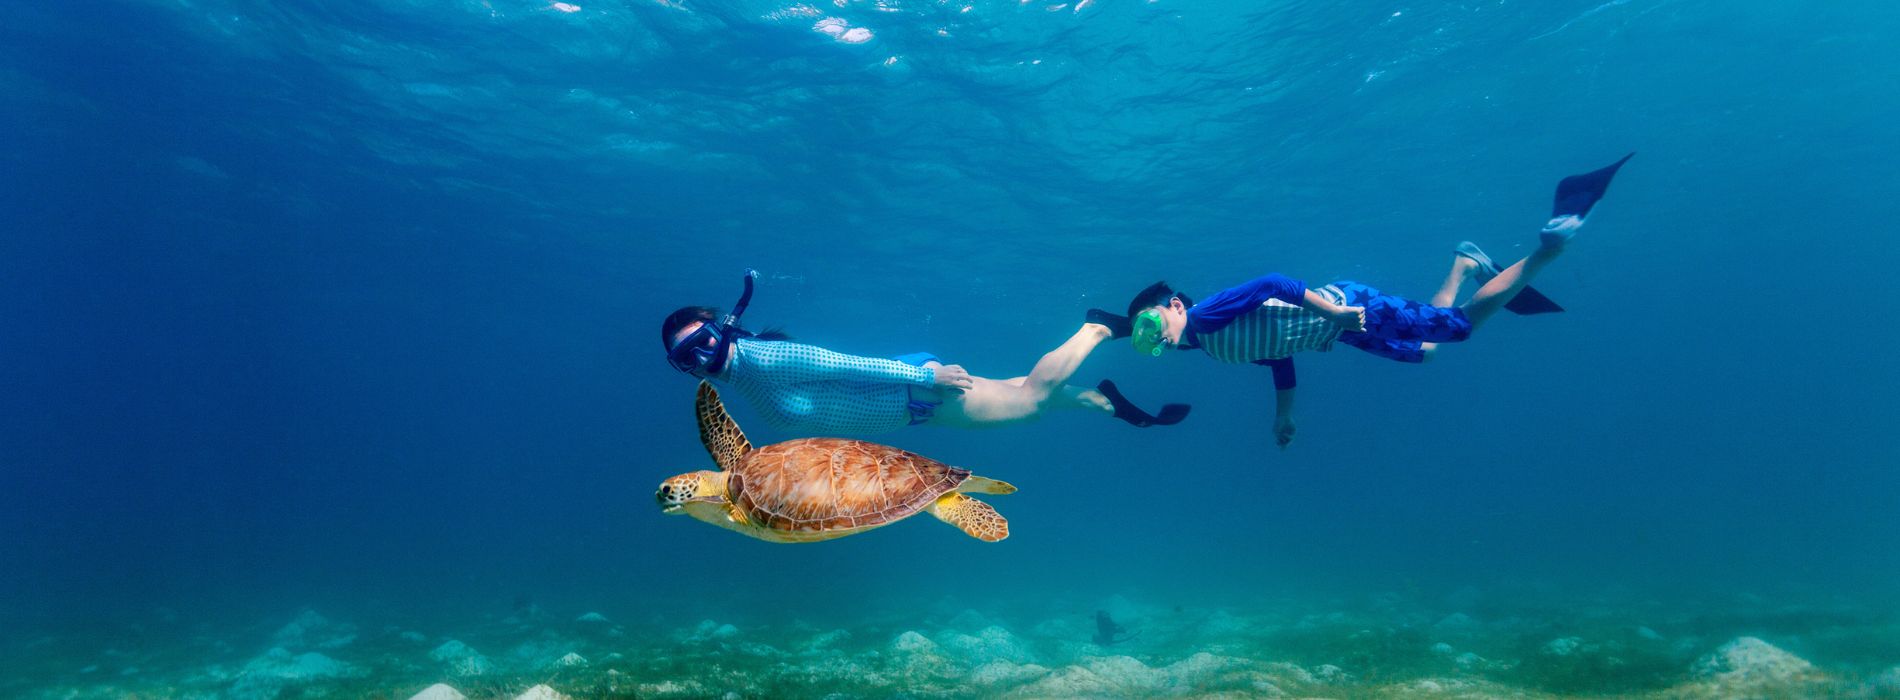 Snorkel with Sea Turtles in Florida - A Magical Underwater Experience